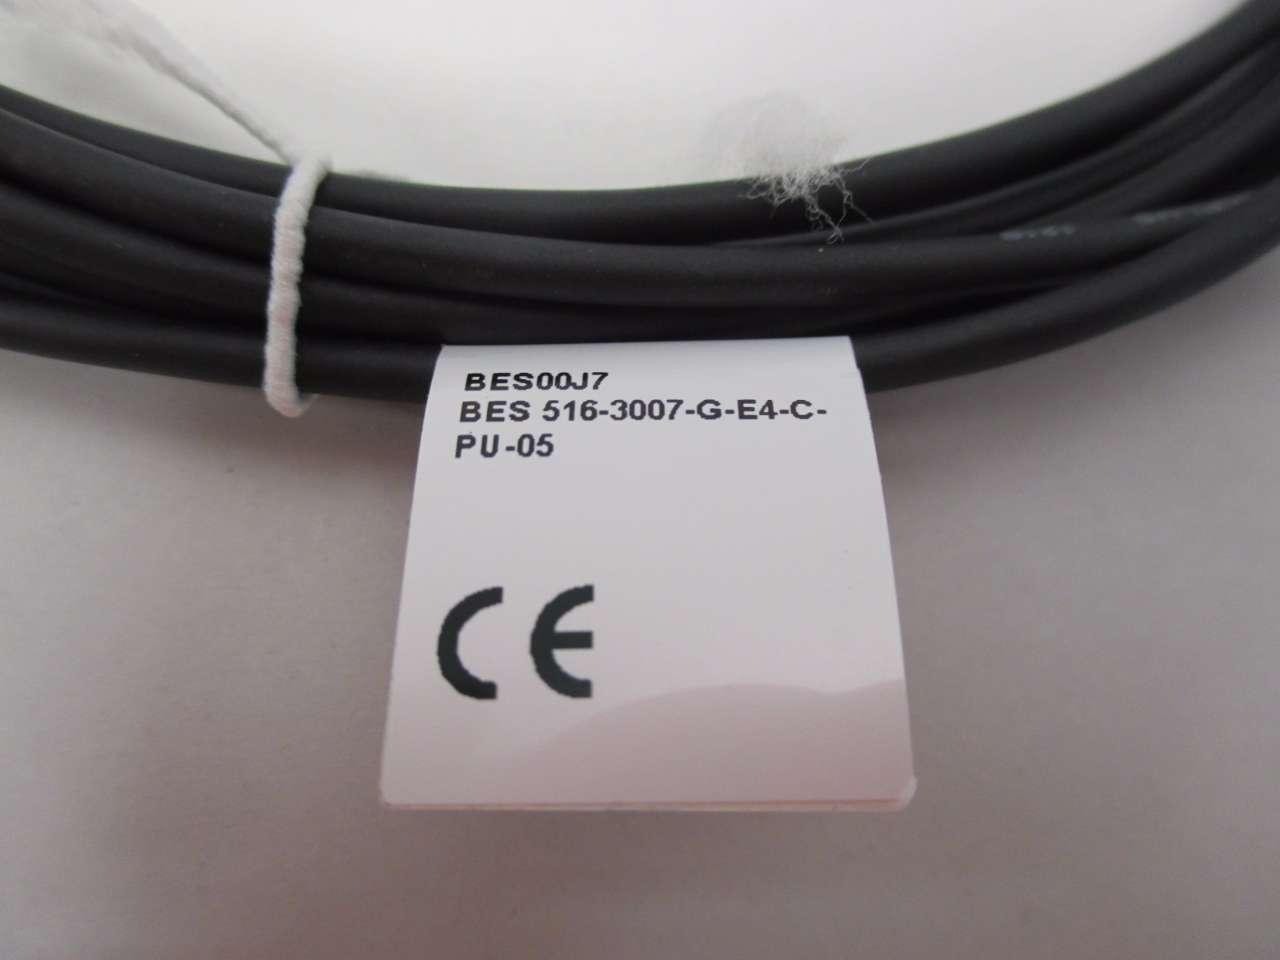 Details about   BALLUFF BES516-3007-G-E4-C-PU-05 INDUCTIVE SENSOR USED * 